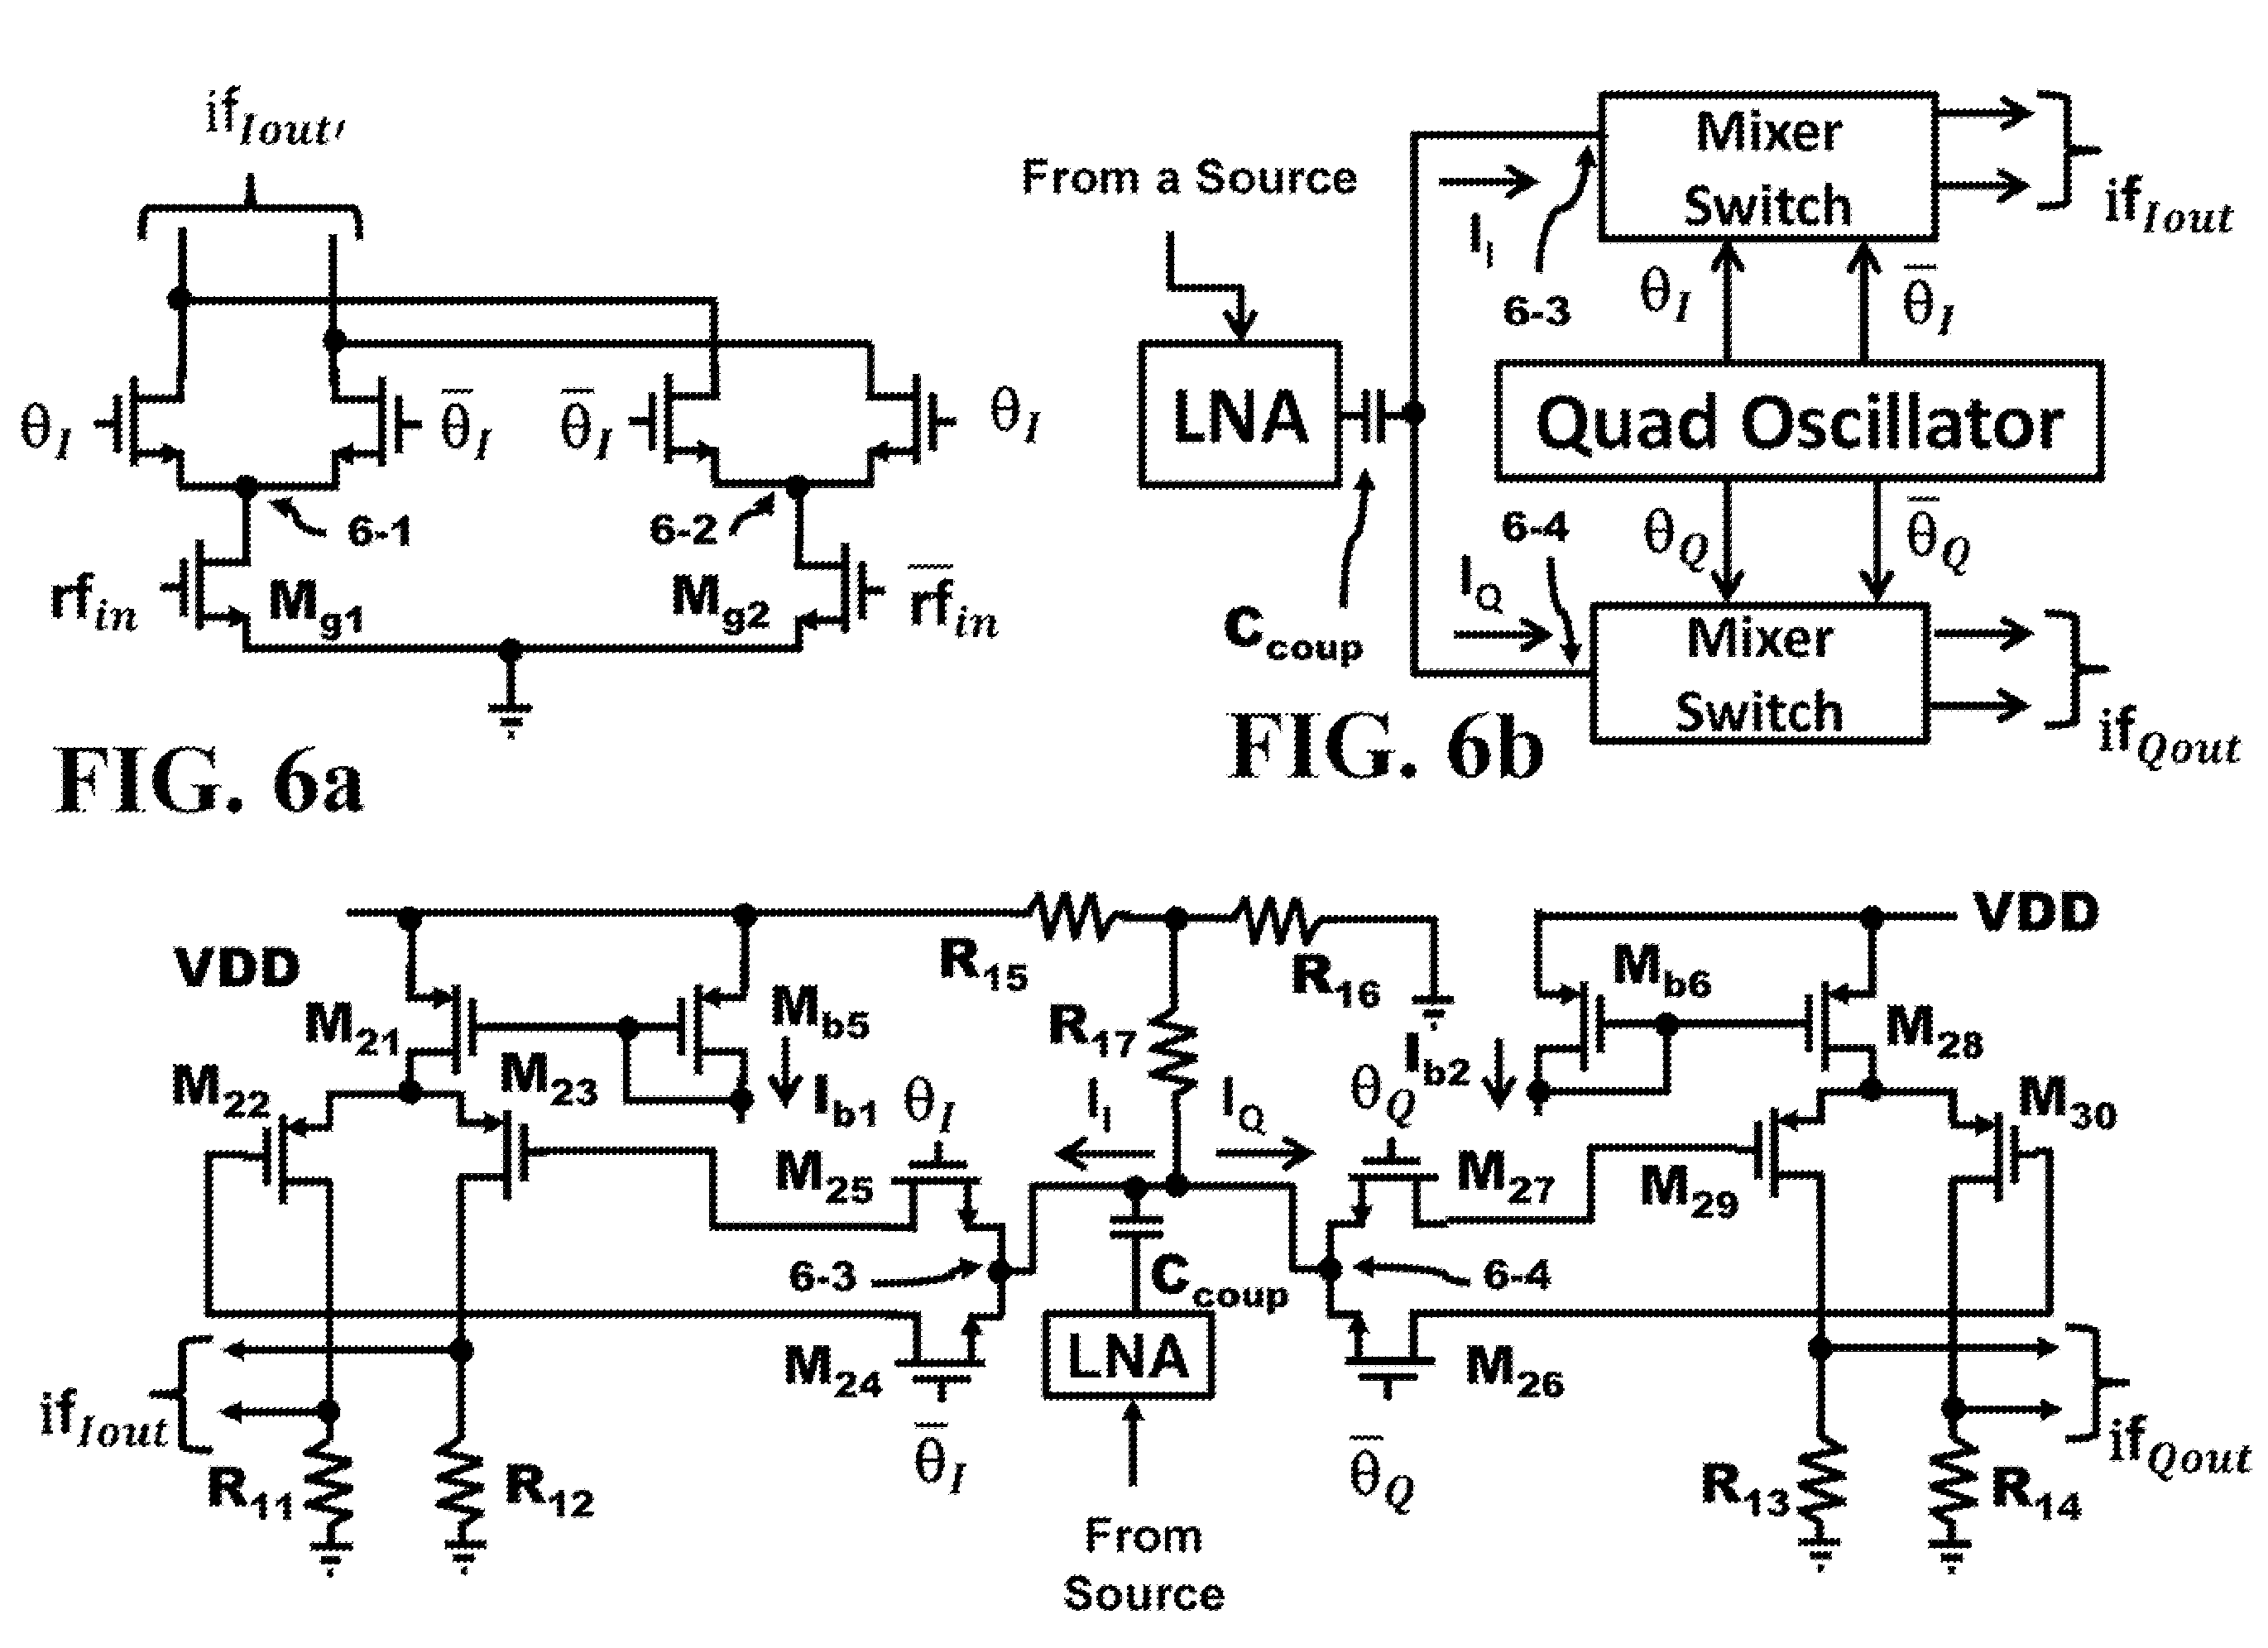 Method and Apparatus of an Input Resistance of a Passive Mixer to Broaden the Input Matching Bandwidth of a Common Source/Gate LNA